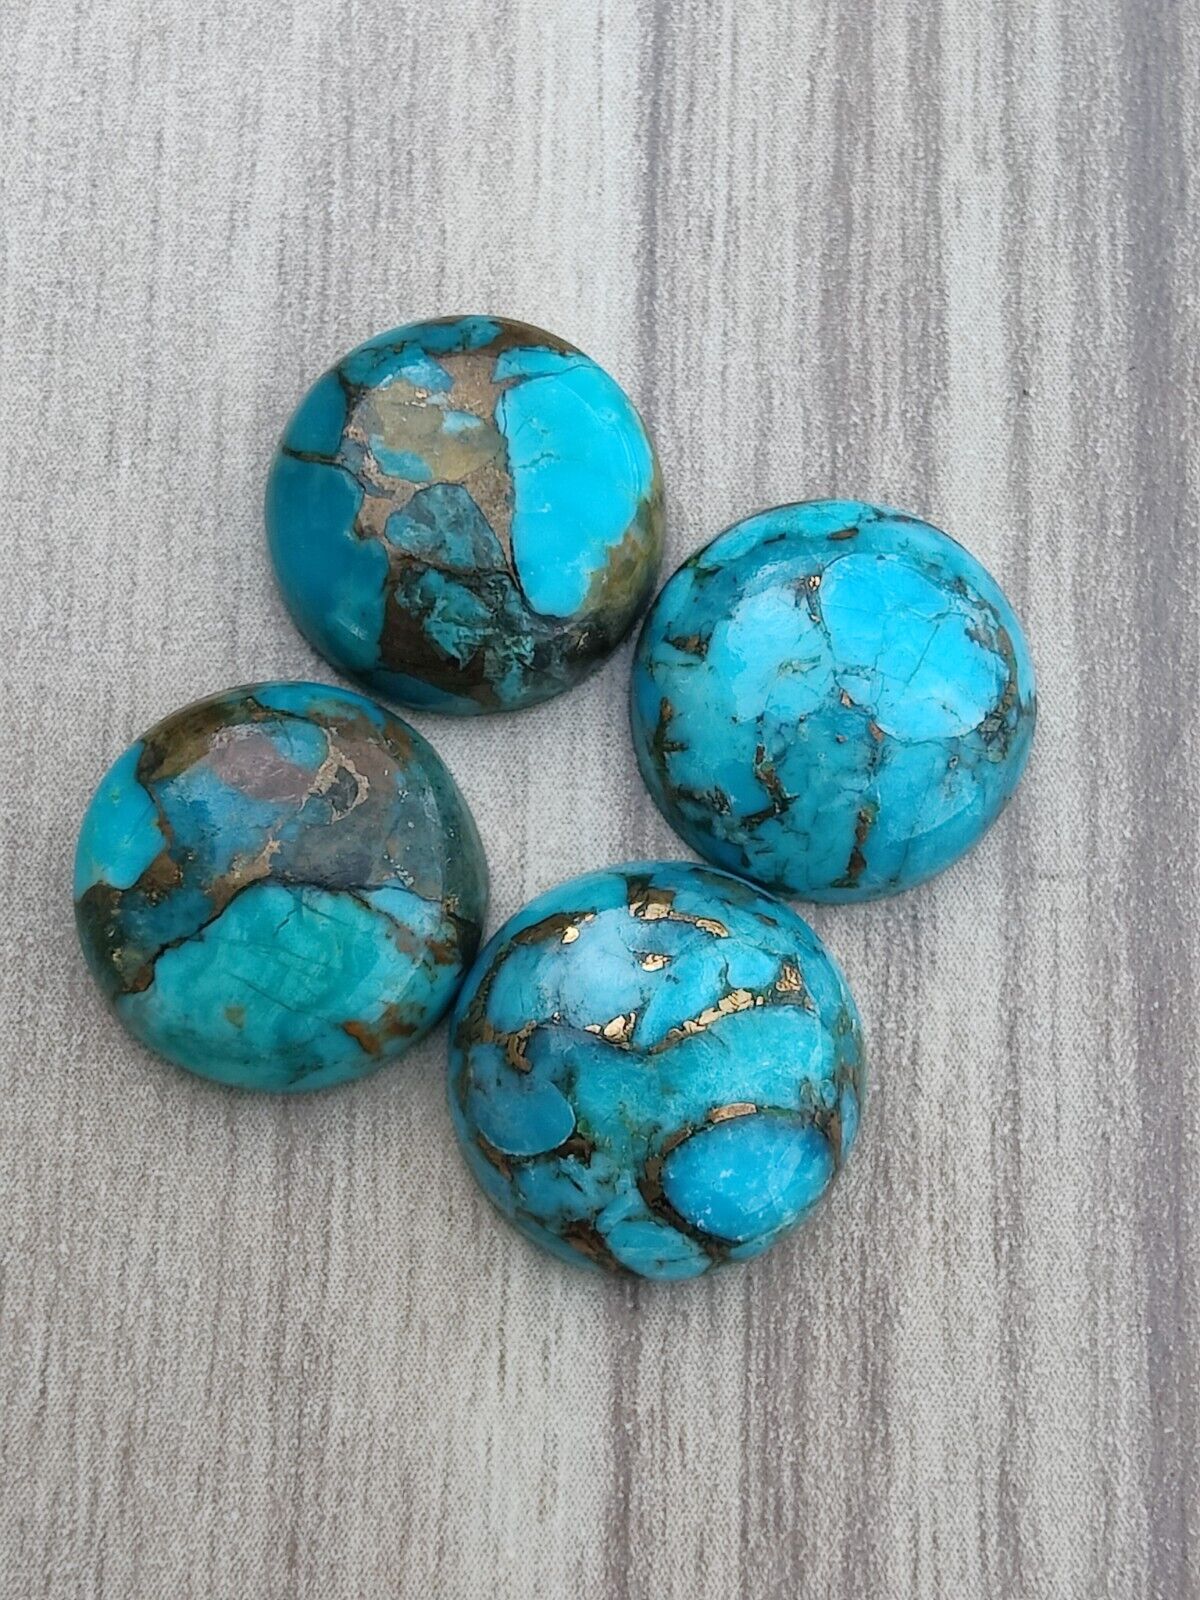 Natural Blue Copper Turquoise Round Shape Cabochon Calibrated Loose Gemstones